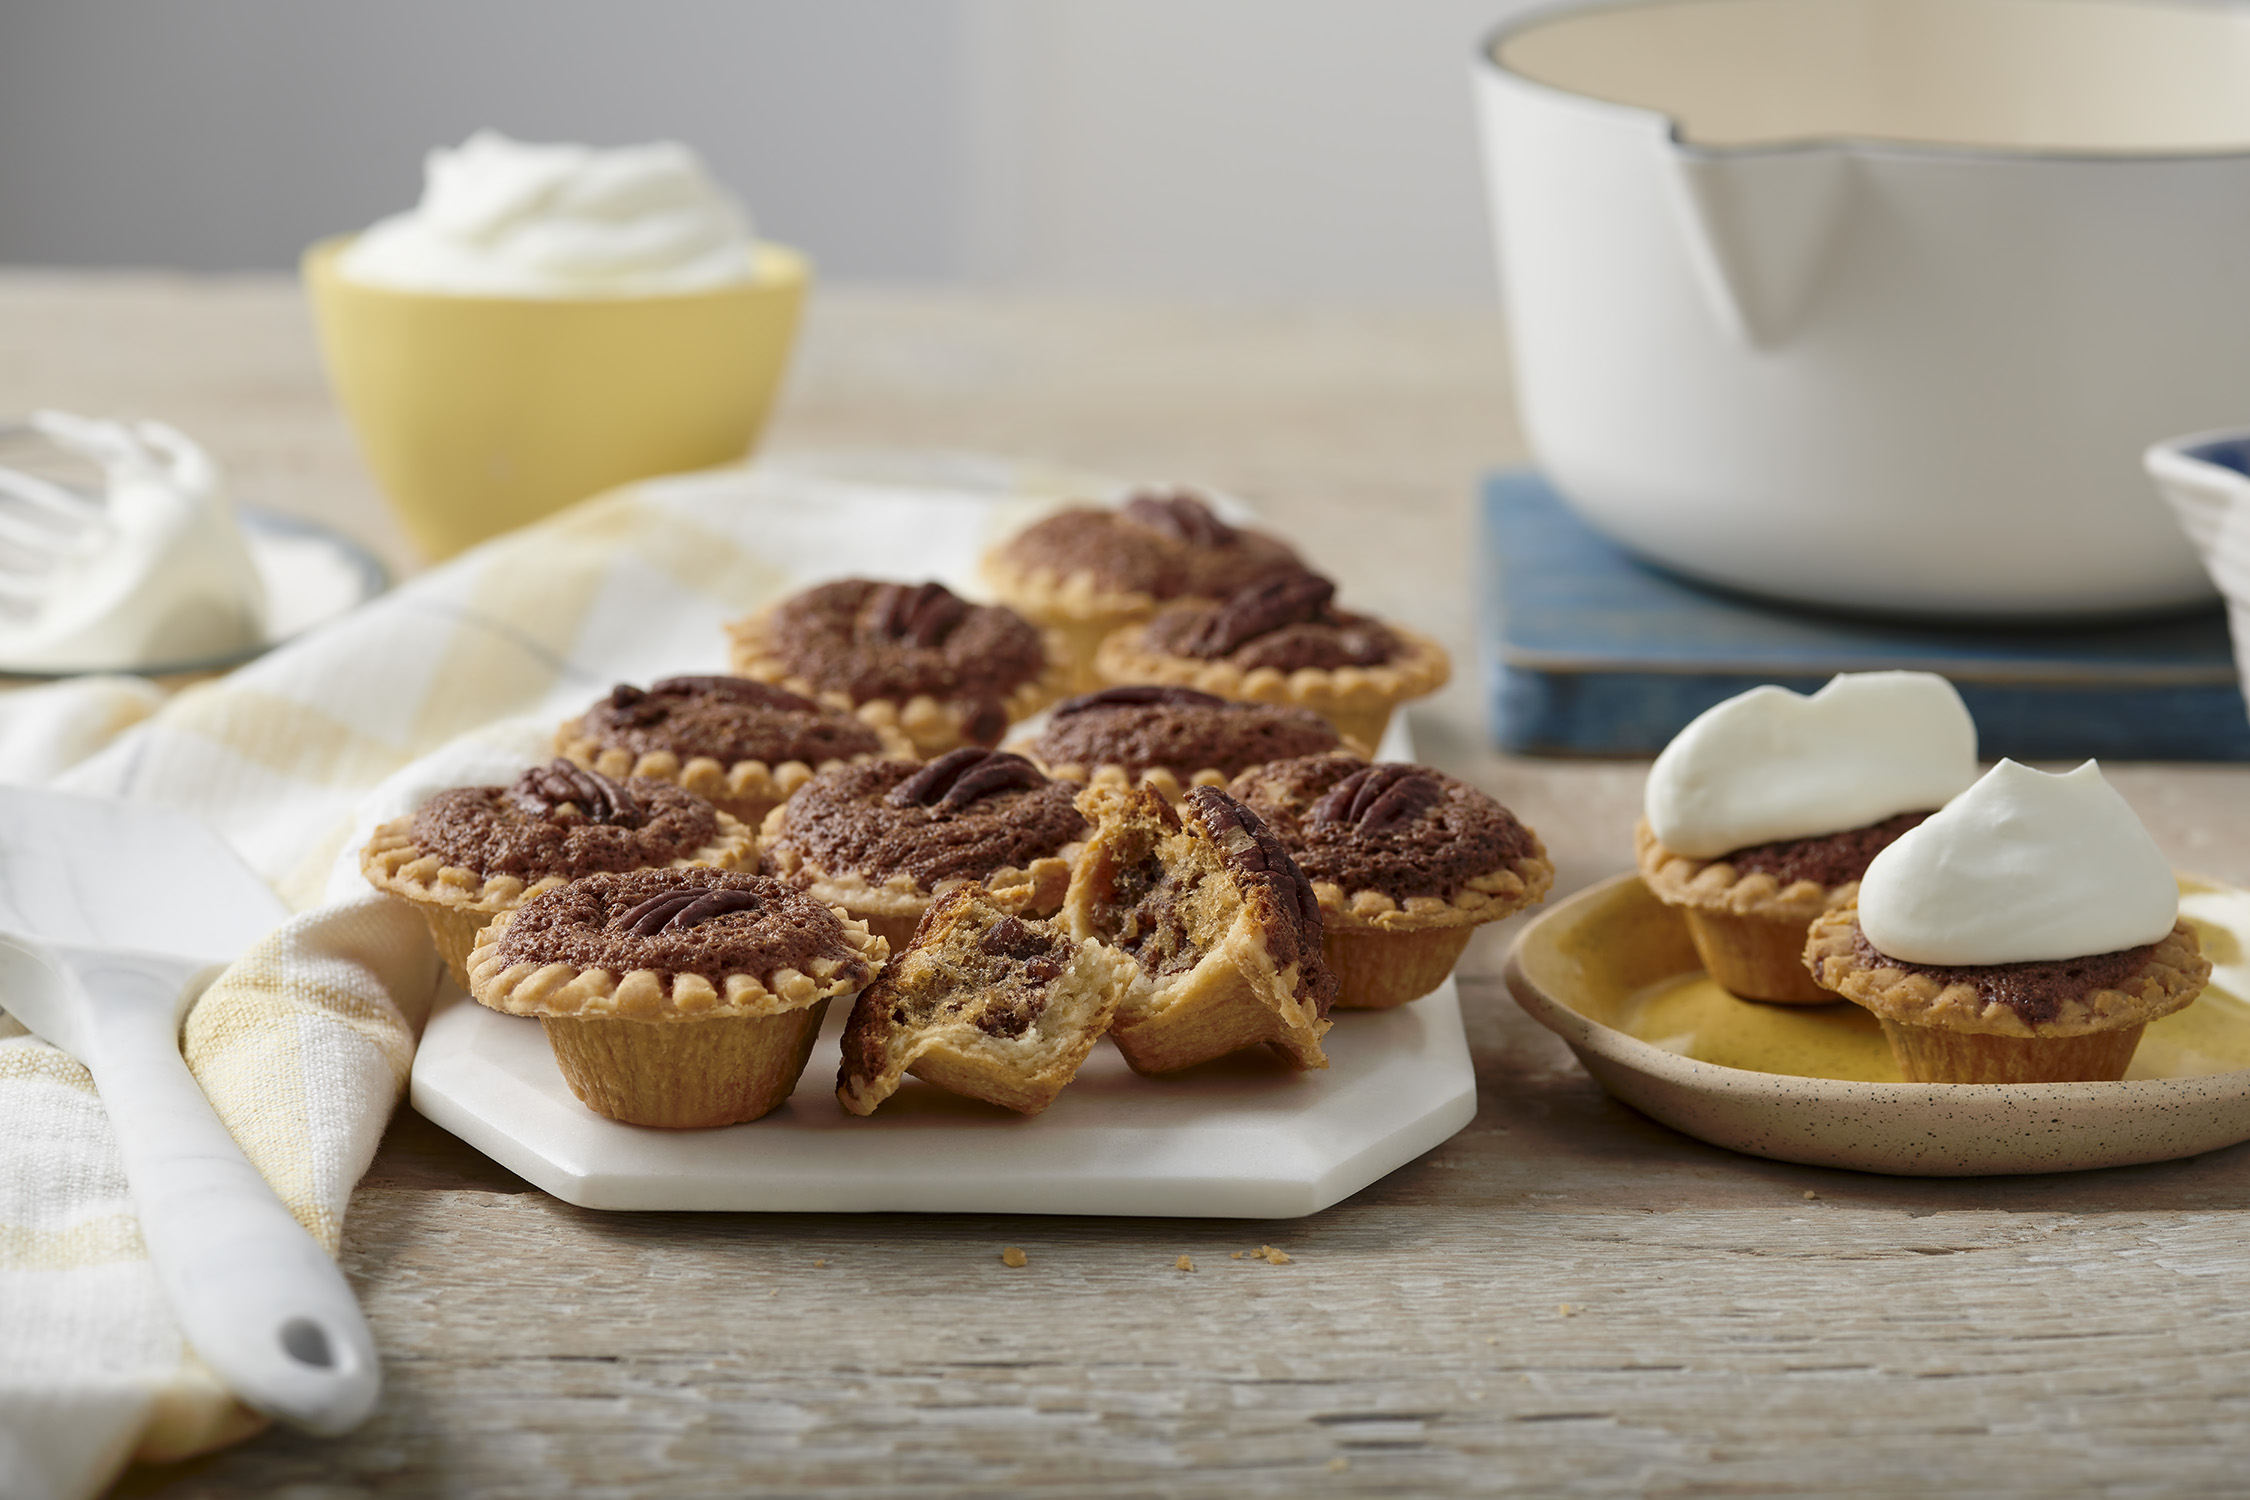 Butterscotch pecan tarts with whip cream